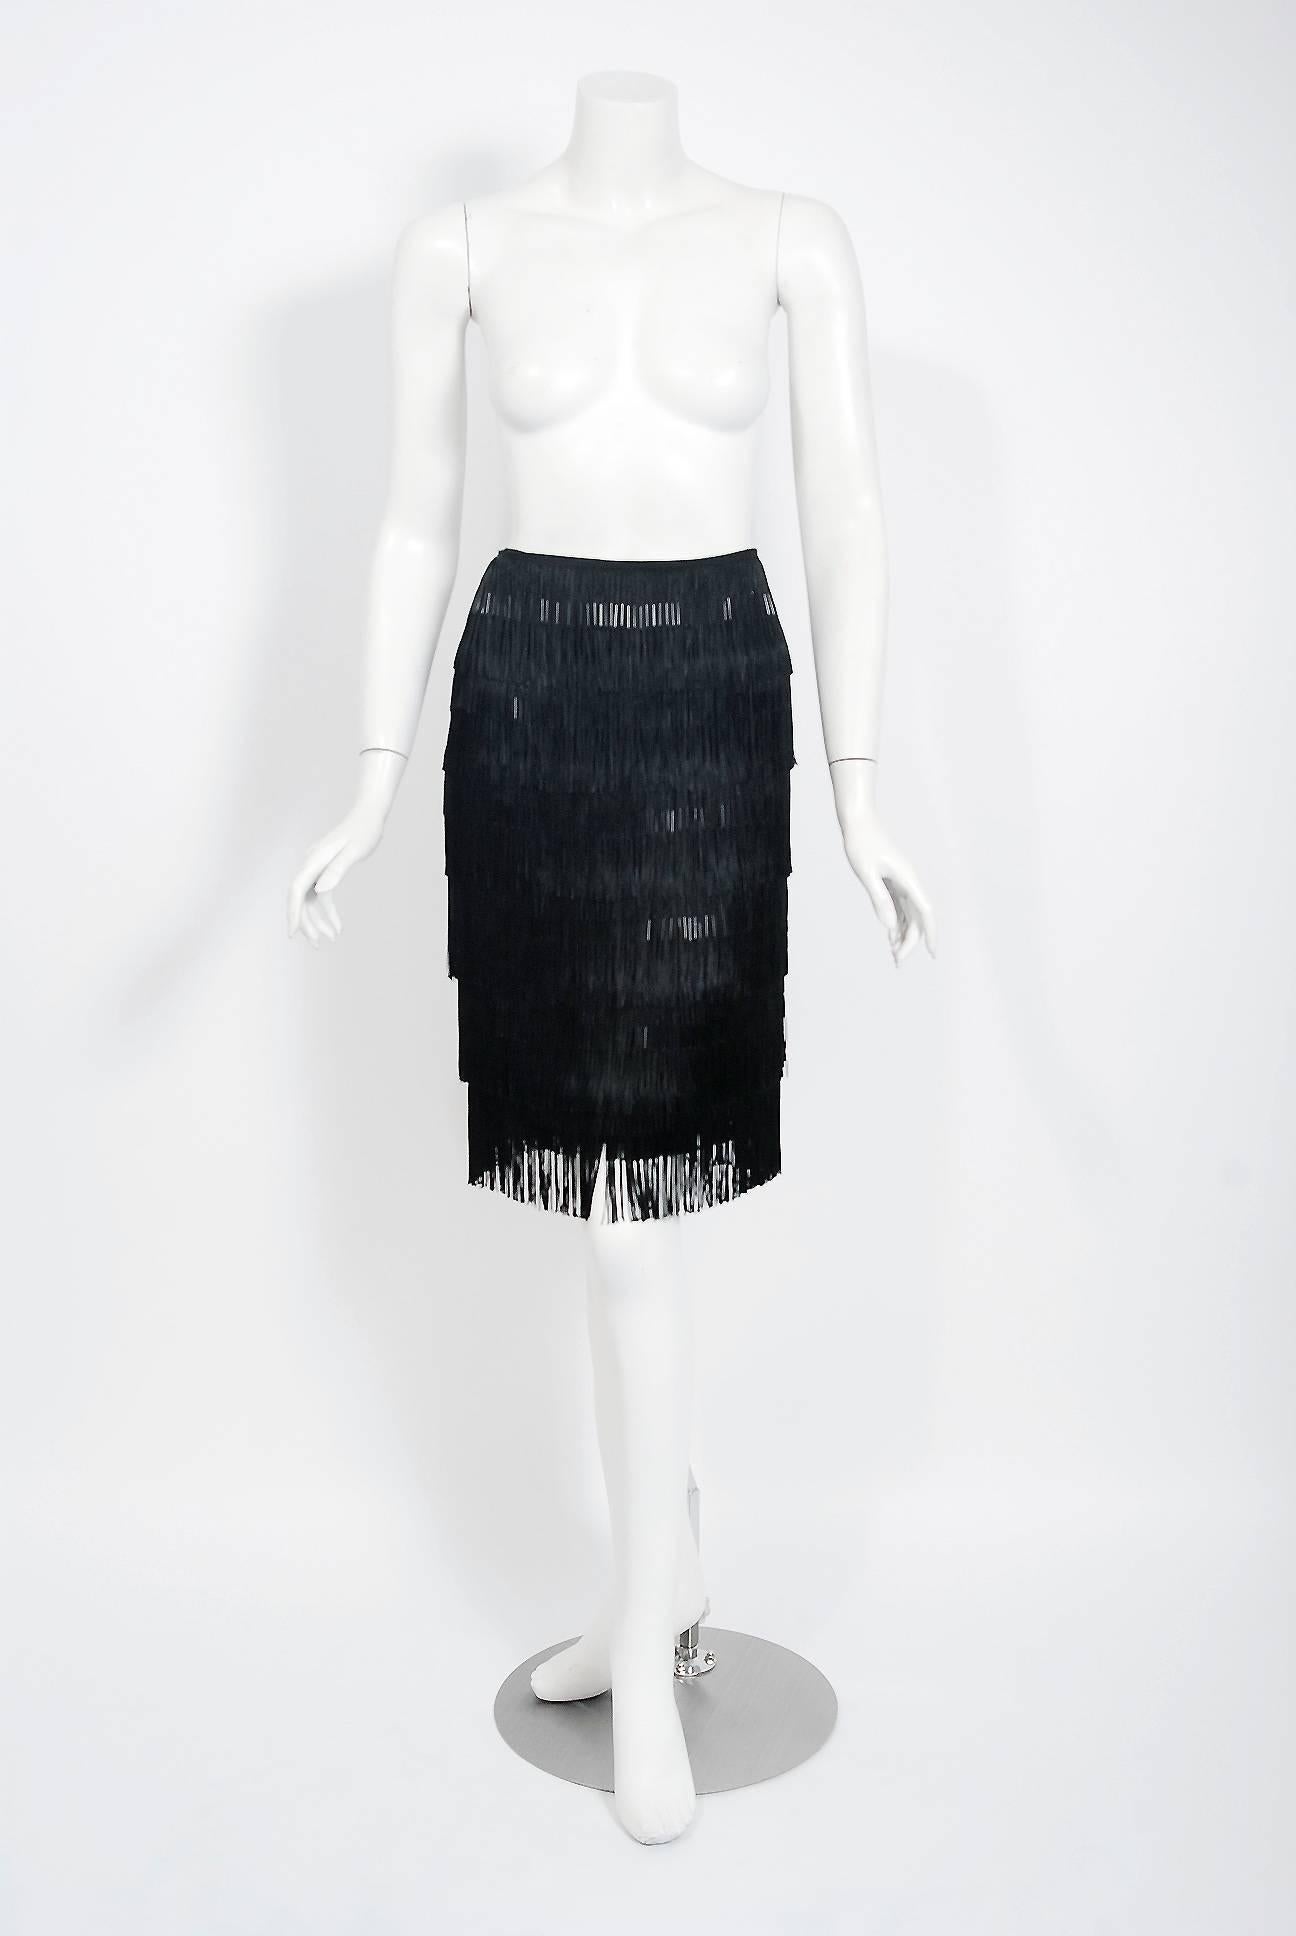 Breathtaking black beaded fringe skirt from the late and great Alexander Mcqueen. He was known for combining superb tailoring with a dramatic aesthetic inspired by various historical periods and sexually charged fetish wear. McQueen's thematic shows